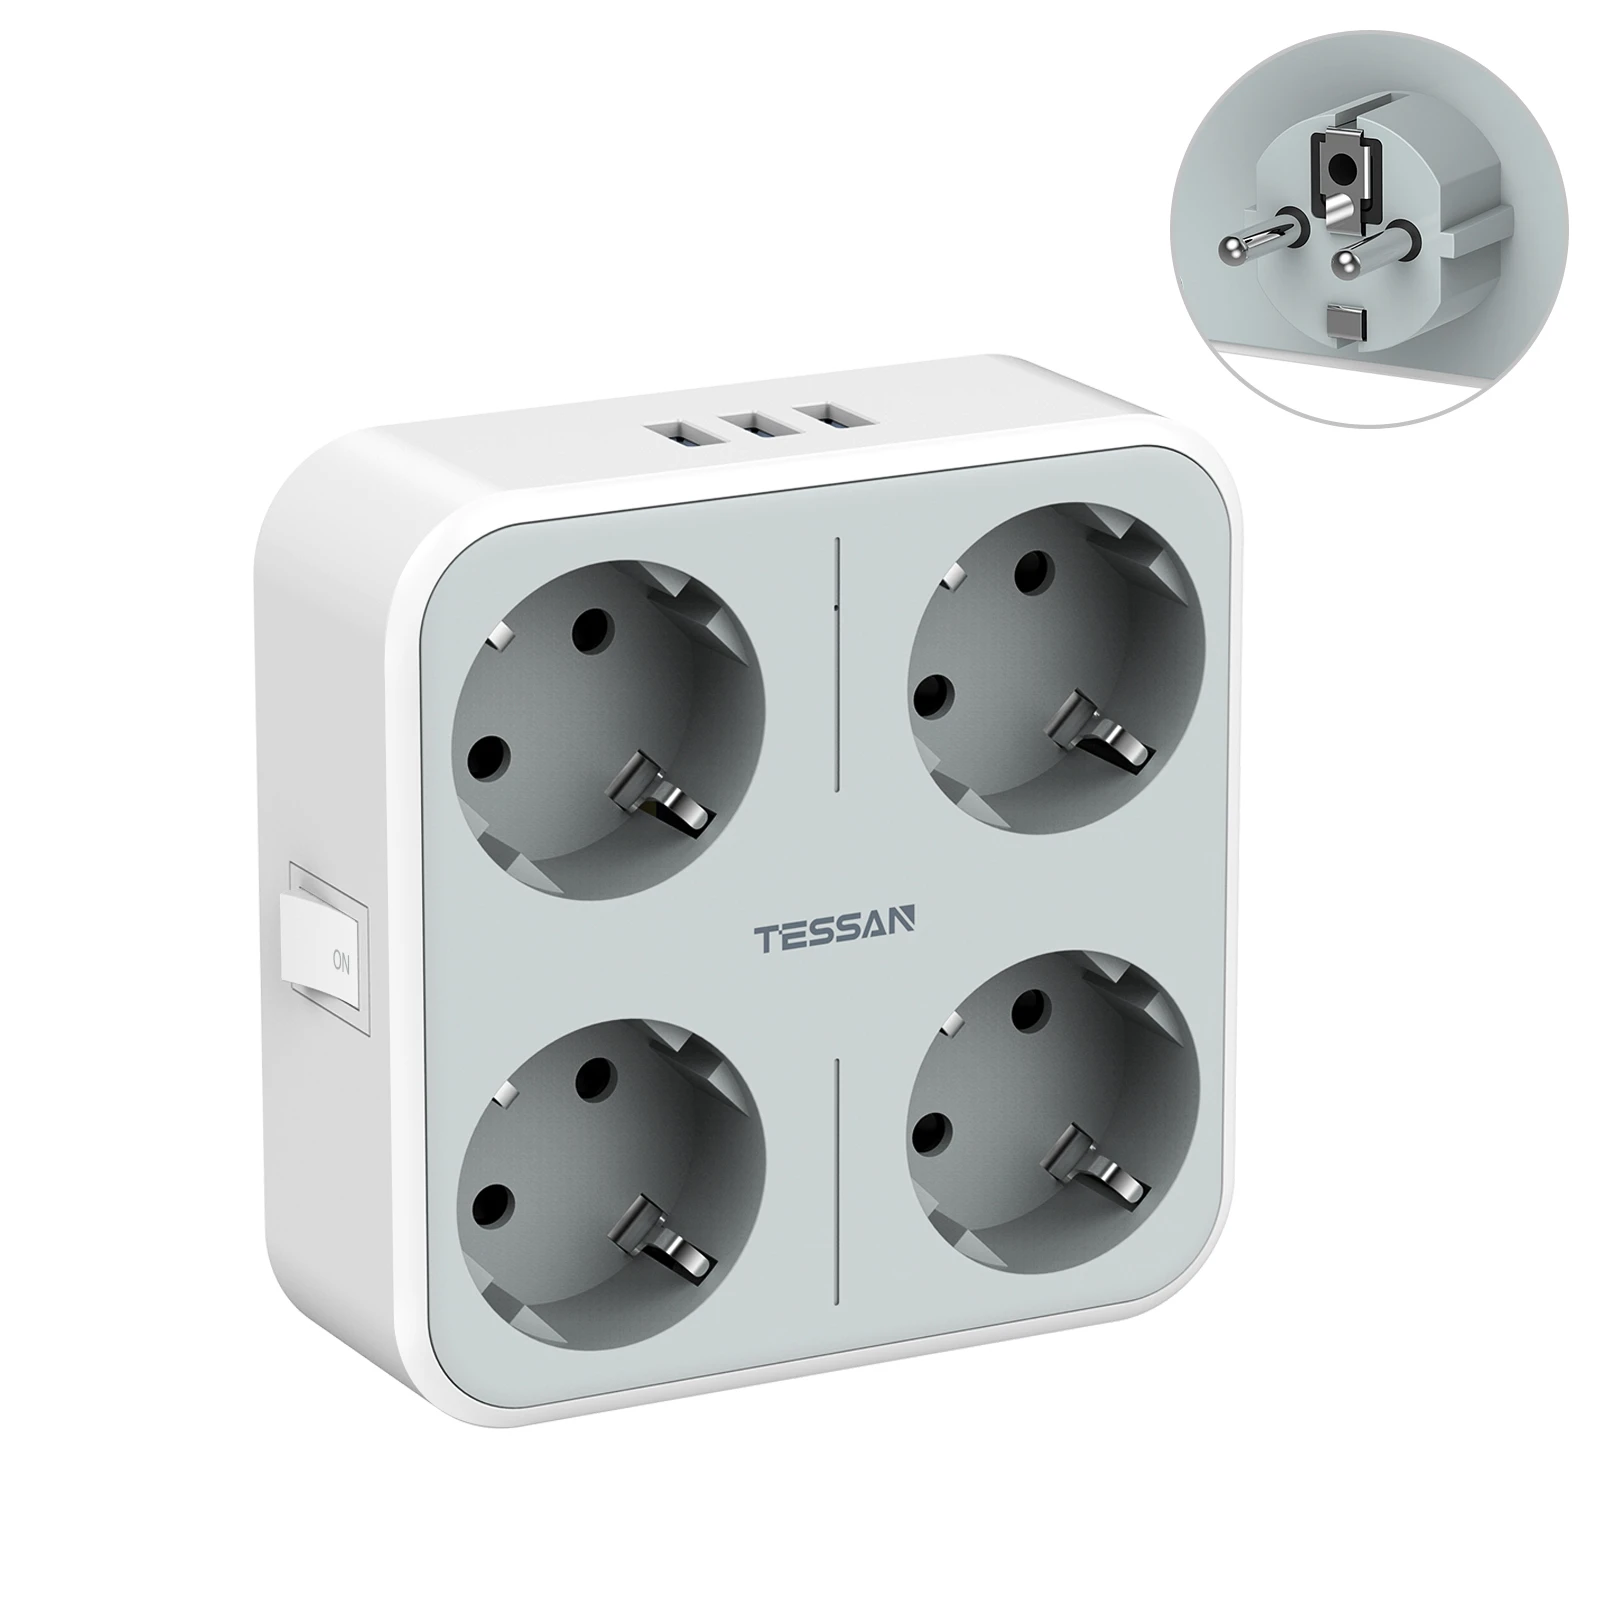 TESSAN Multi Outlets Expander Wall USB Socket EU Plug Power Strip with 4 Outlets 3 USB Ports and On/Off Switch